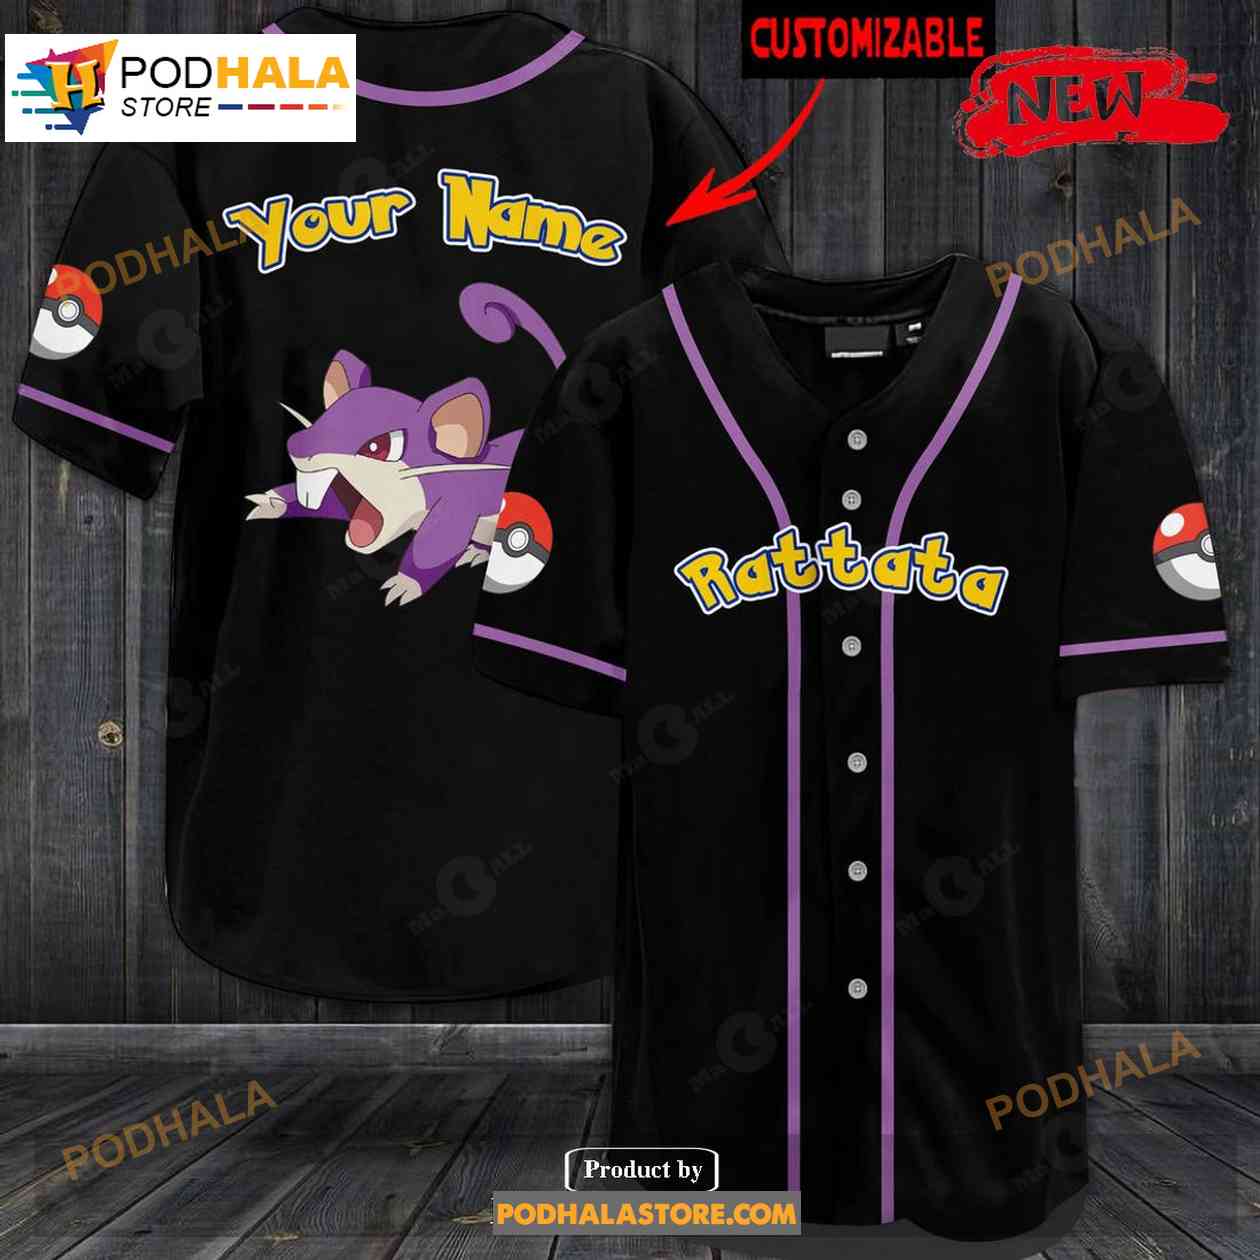  Custom Baseball Jersey Design Your Own Personalized